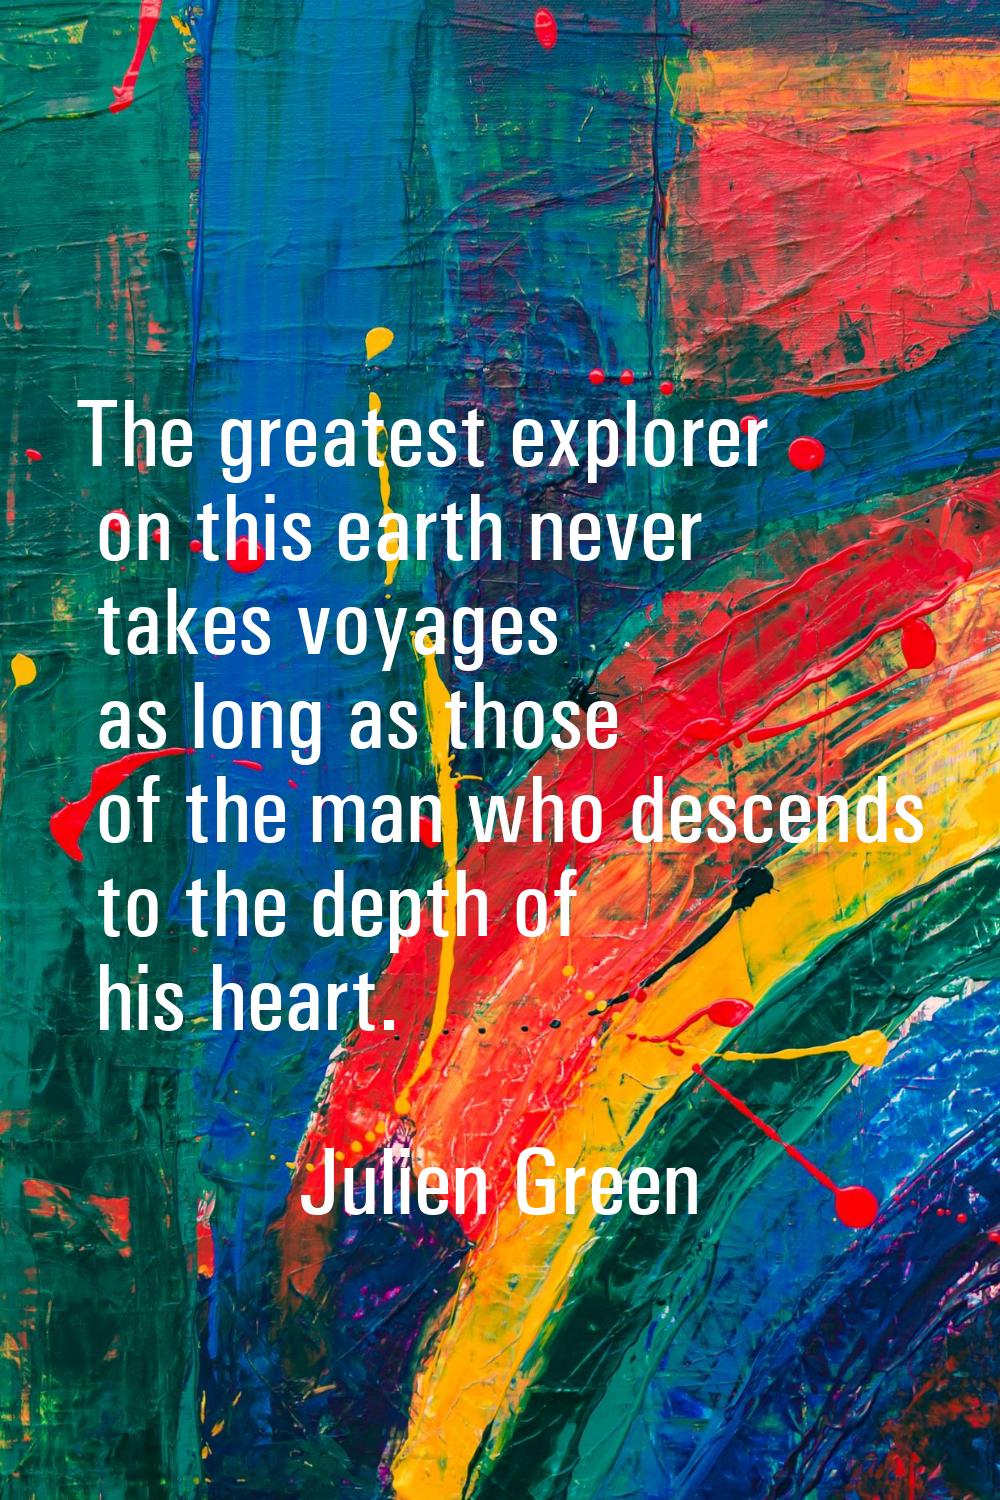 The greatest explorer on this earth never takes voyages as long as those of the man who descends to